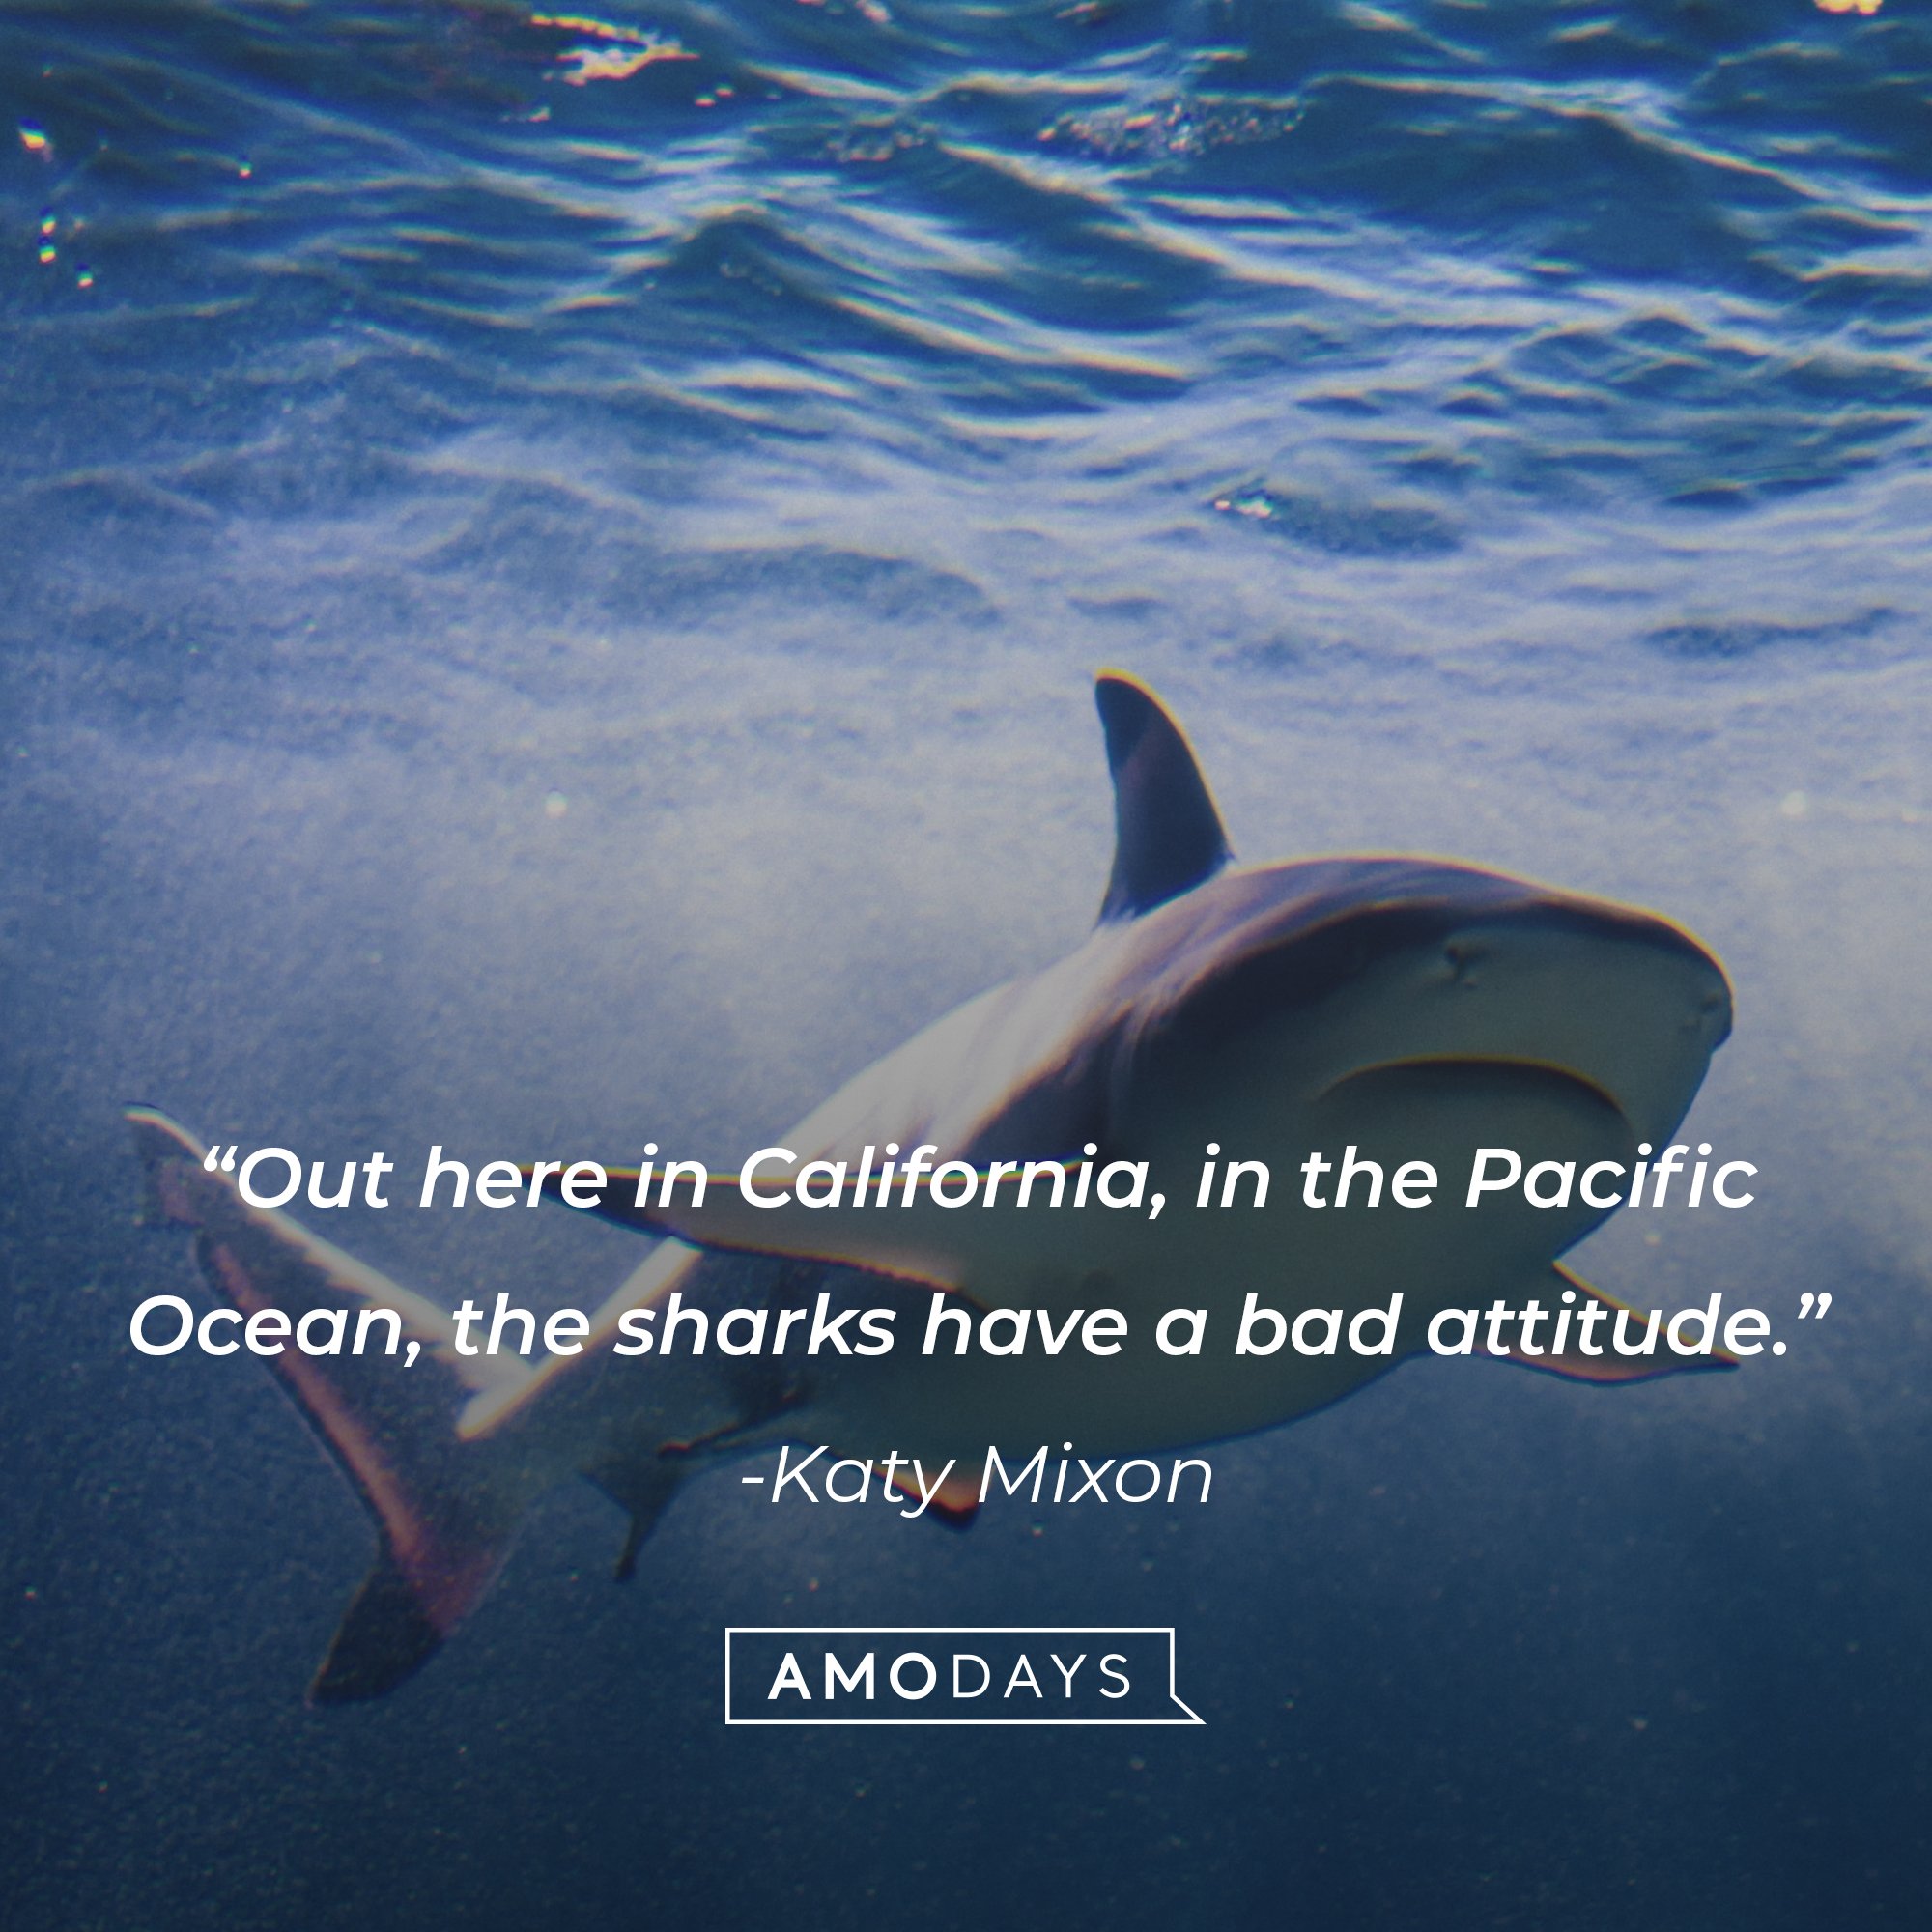 Katy Mixon's quote: “Out here in California, in the Pacific Ocean, the sharks have a bad attitude.” | Image: AmoDays